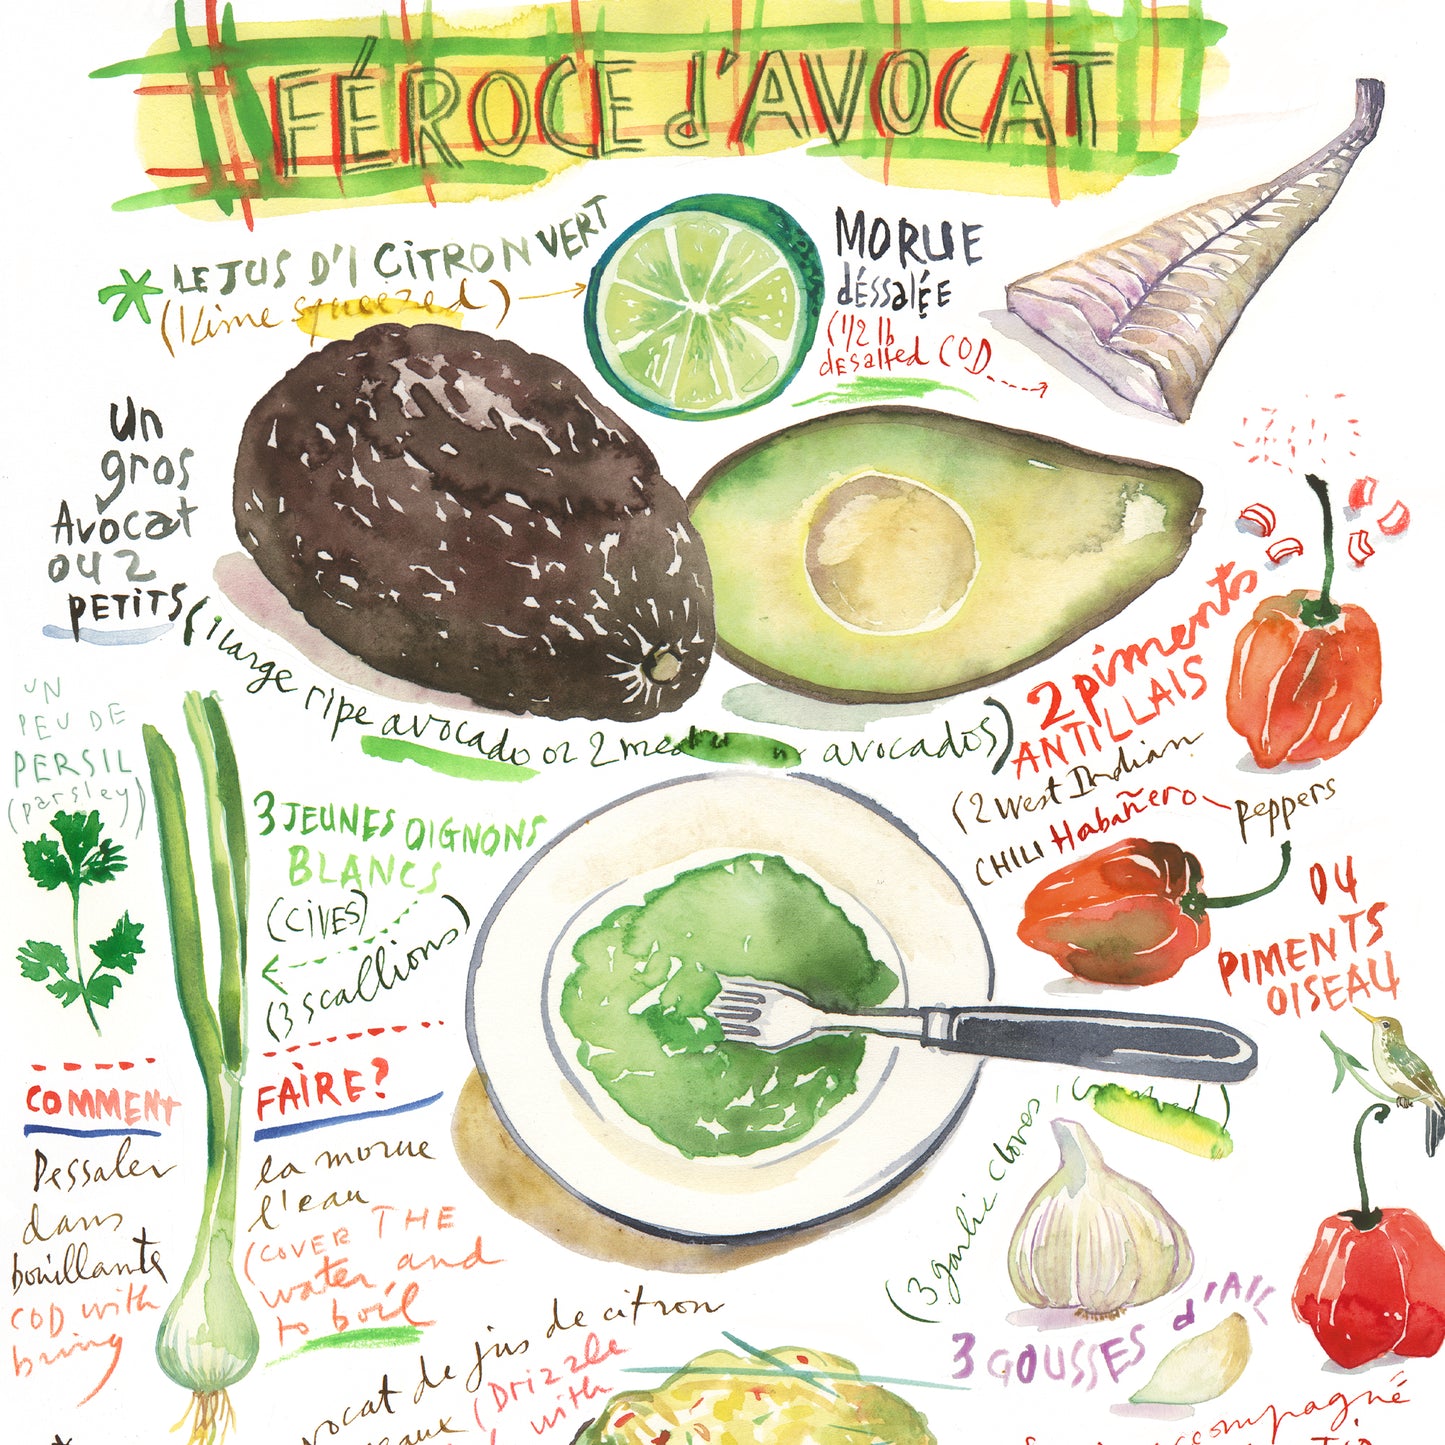 Féroce d'avocat - French West Indies recipe - Bilingual print